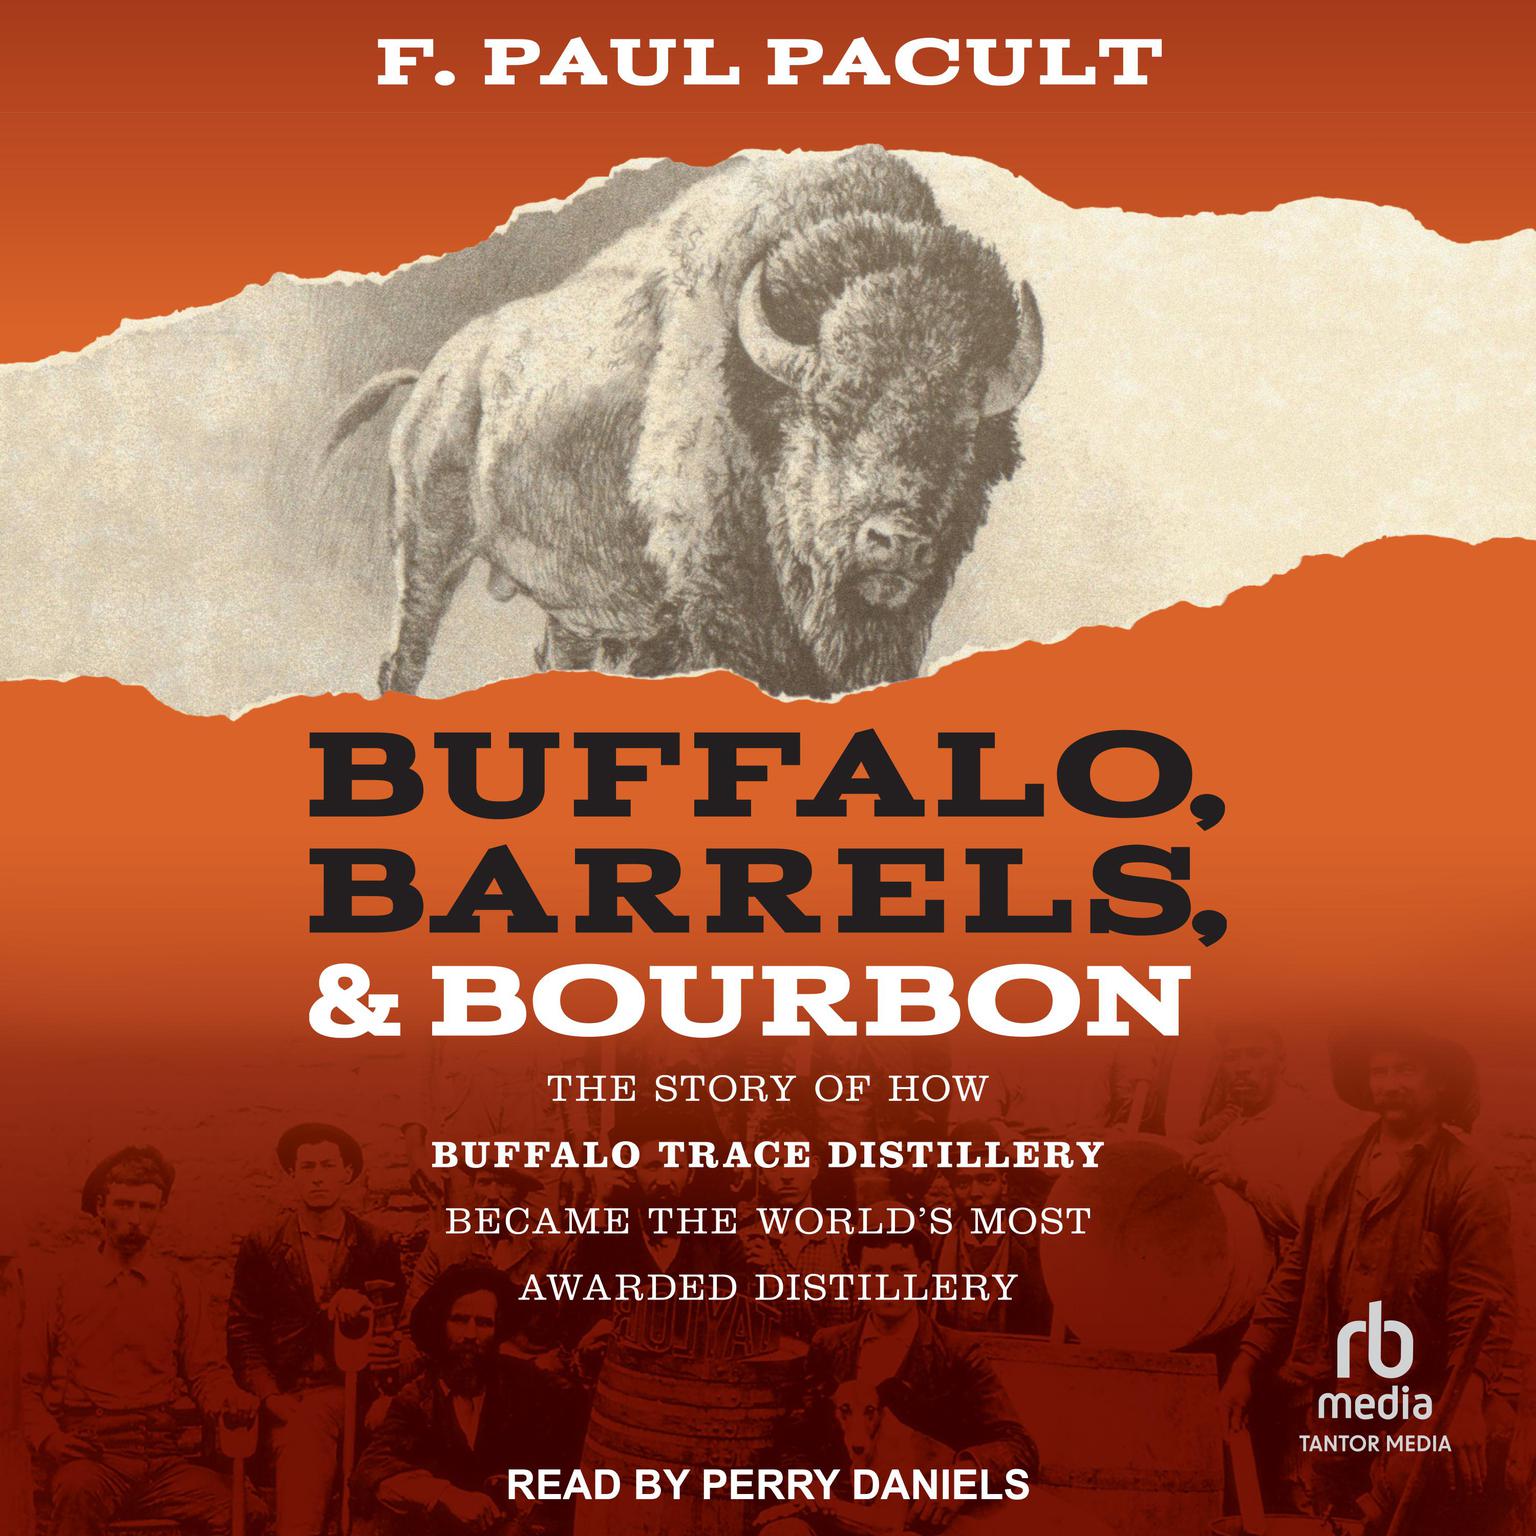 Buffalo, Barrels, & Bourbon: The Story of How Buffalo Trace Distillery Became The Worlds Most Awarded Distillery Audiobook, by F. Paul Pacult